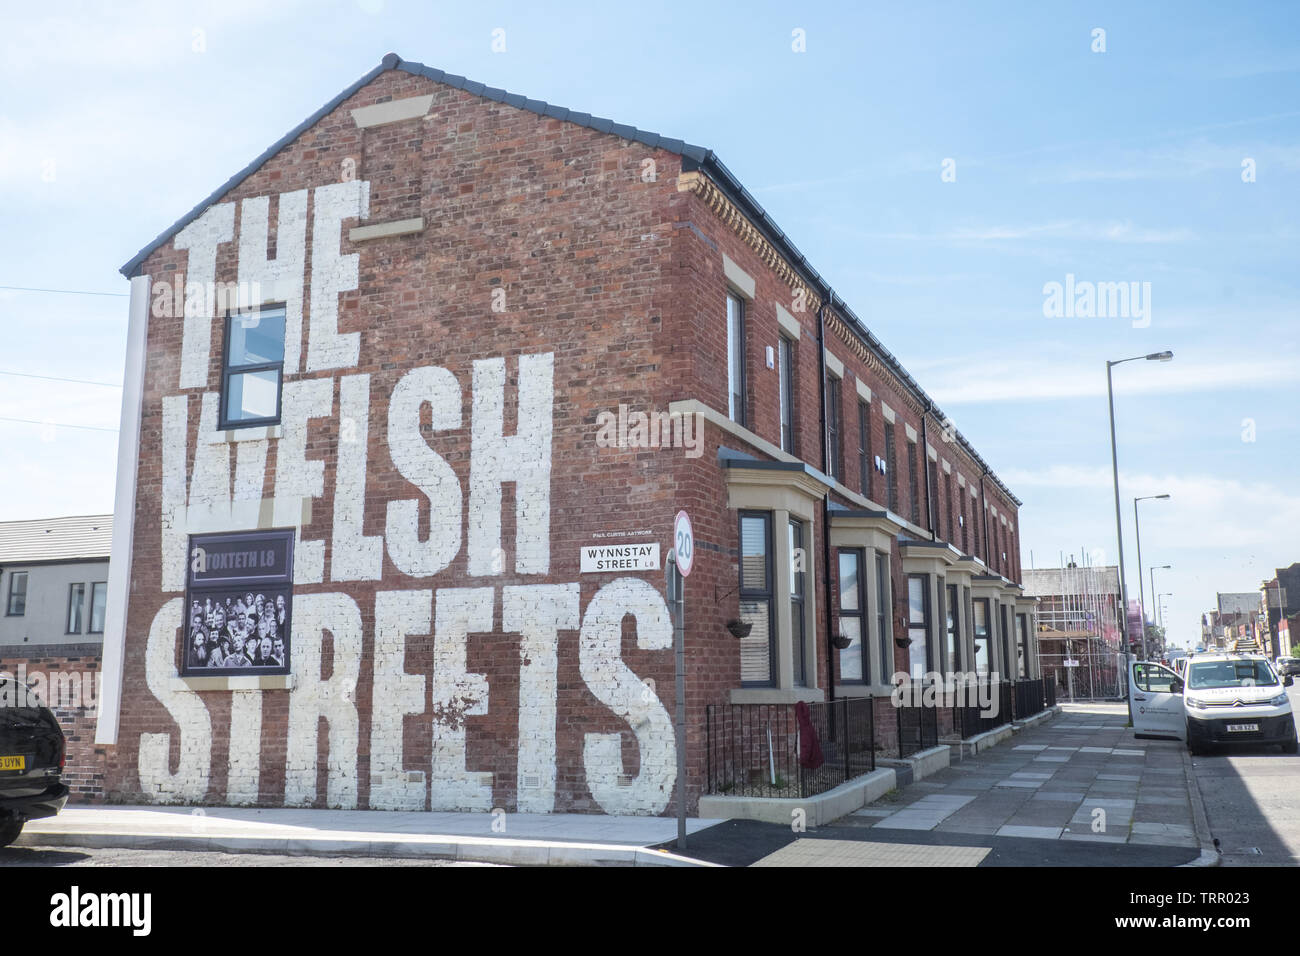 The Welsh Streets,Welsh Streets,Dingle,Toxteth,Liverpool 8,terrace,terraced,housing,redevelopment,Liverpool,Merseyside,Northern,city,England,UK,GB, Stock Photo